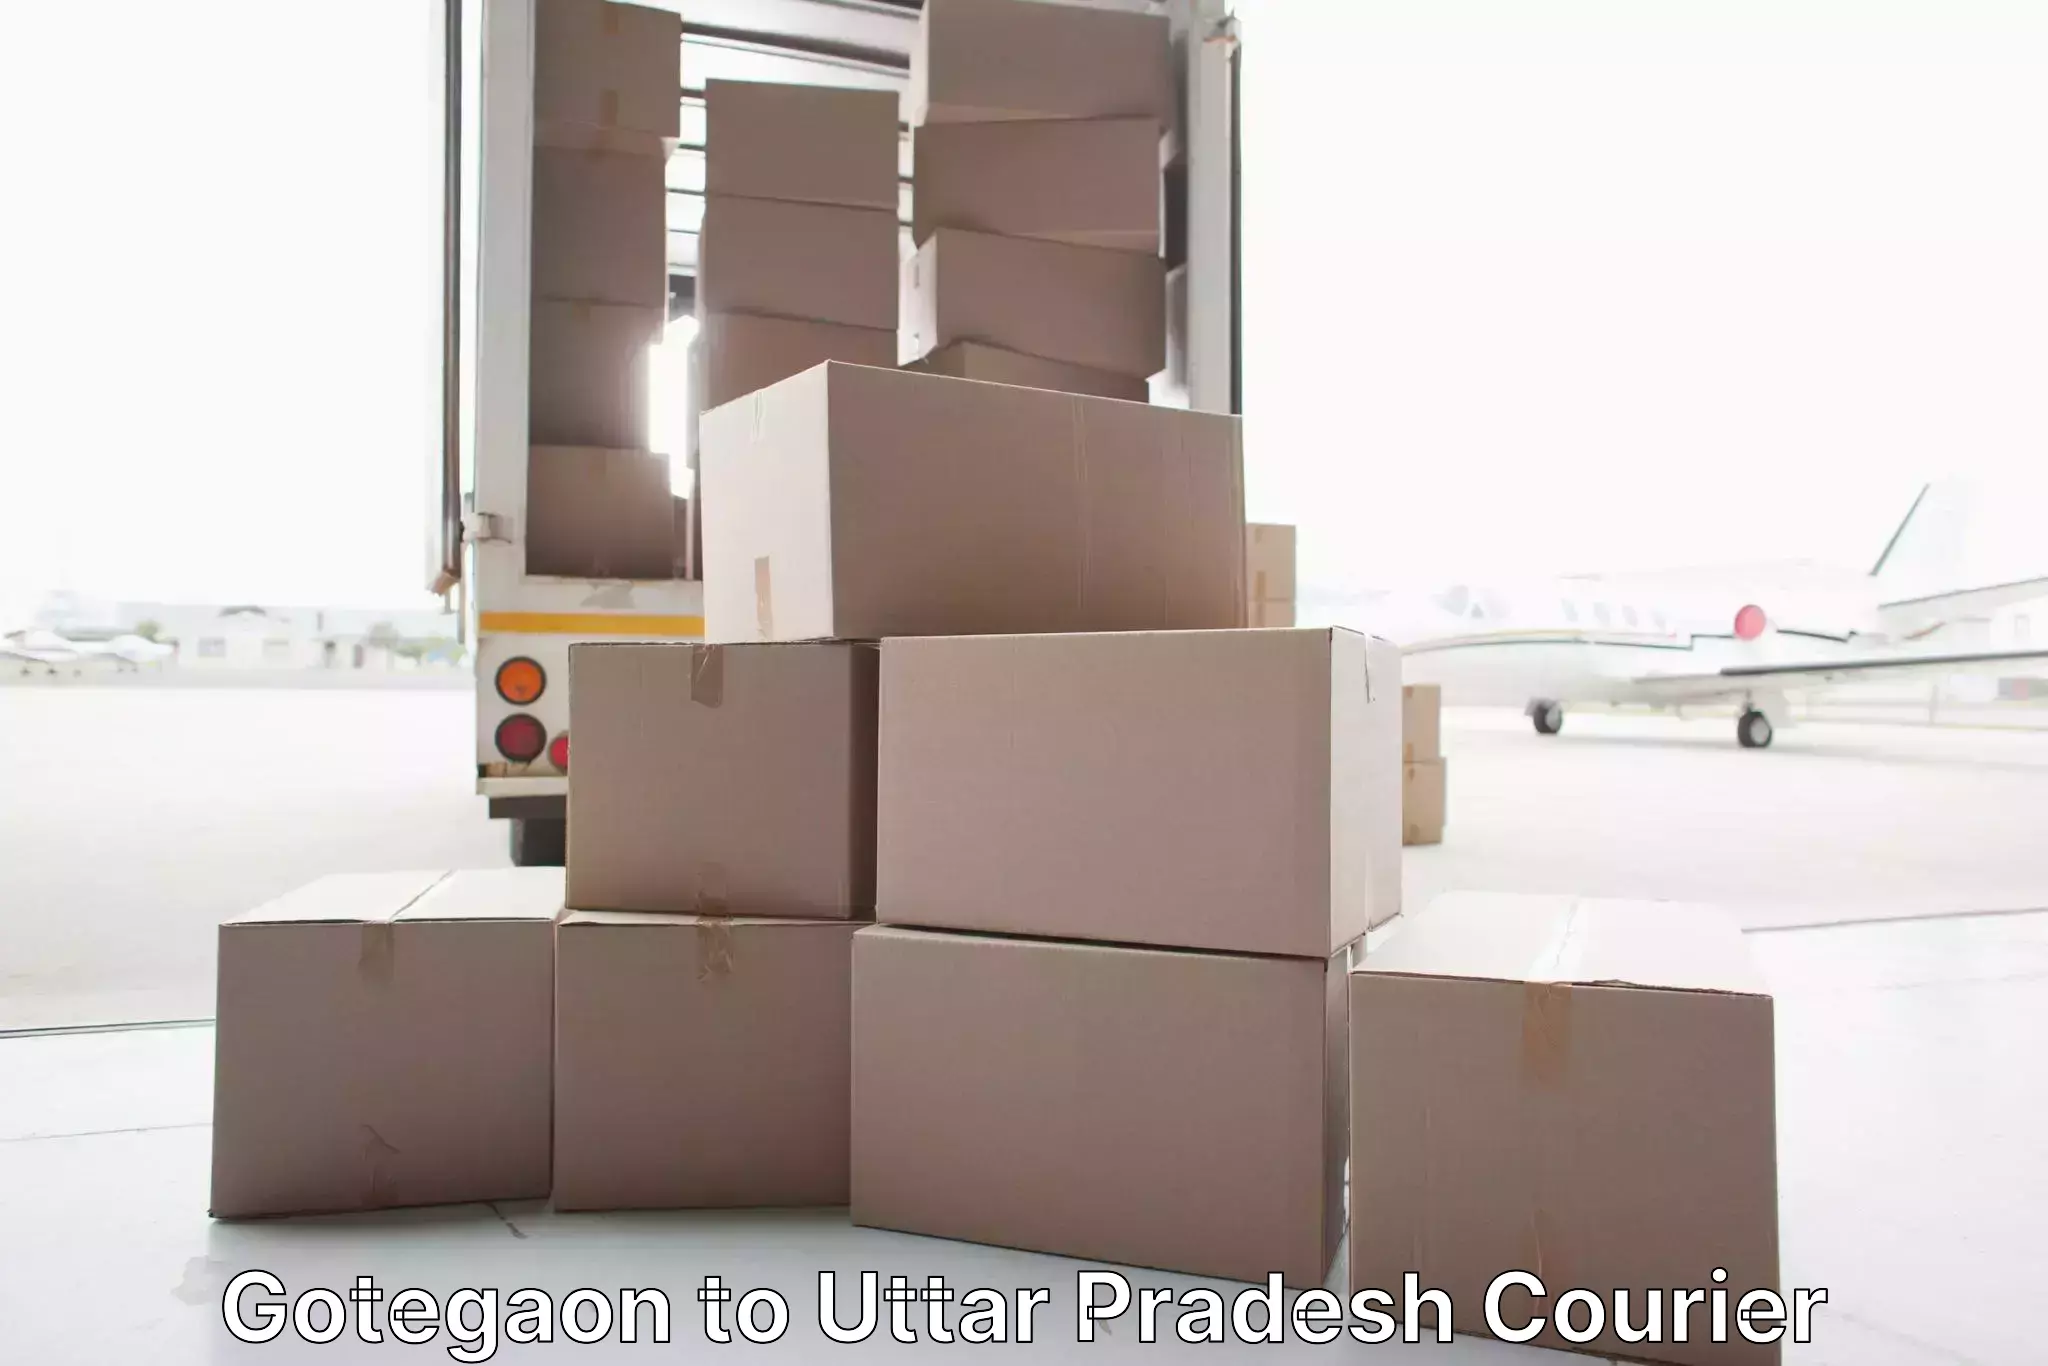 Trusted home movers Gotegaon to Aligarh